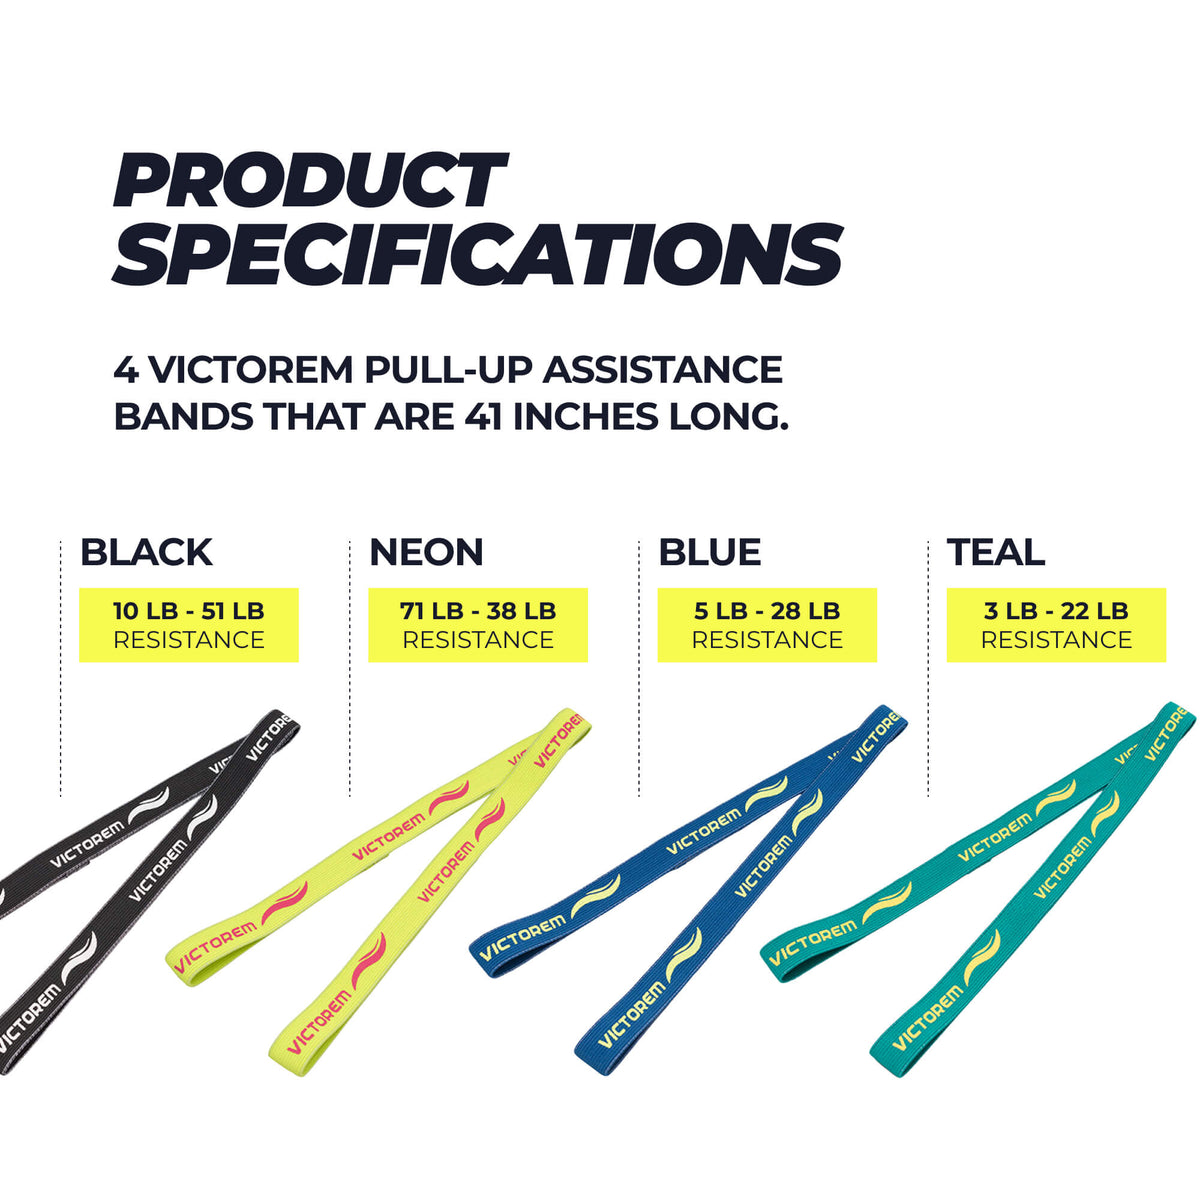 pull-up bands specifications